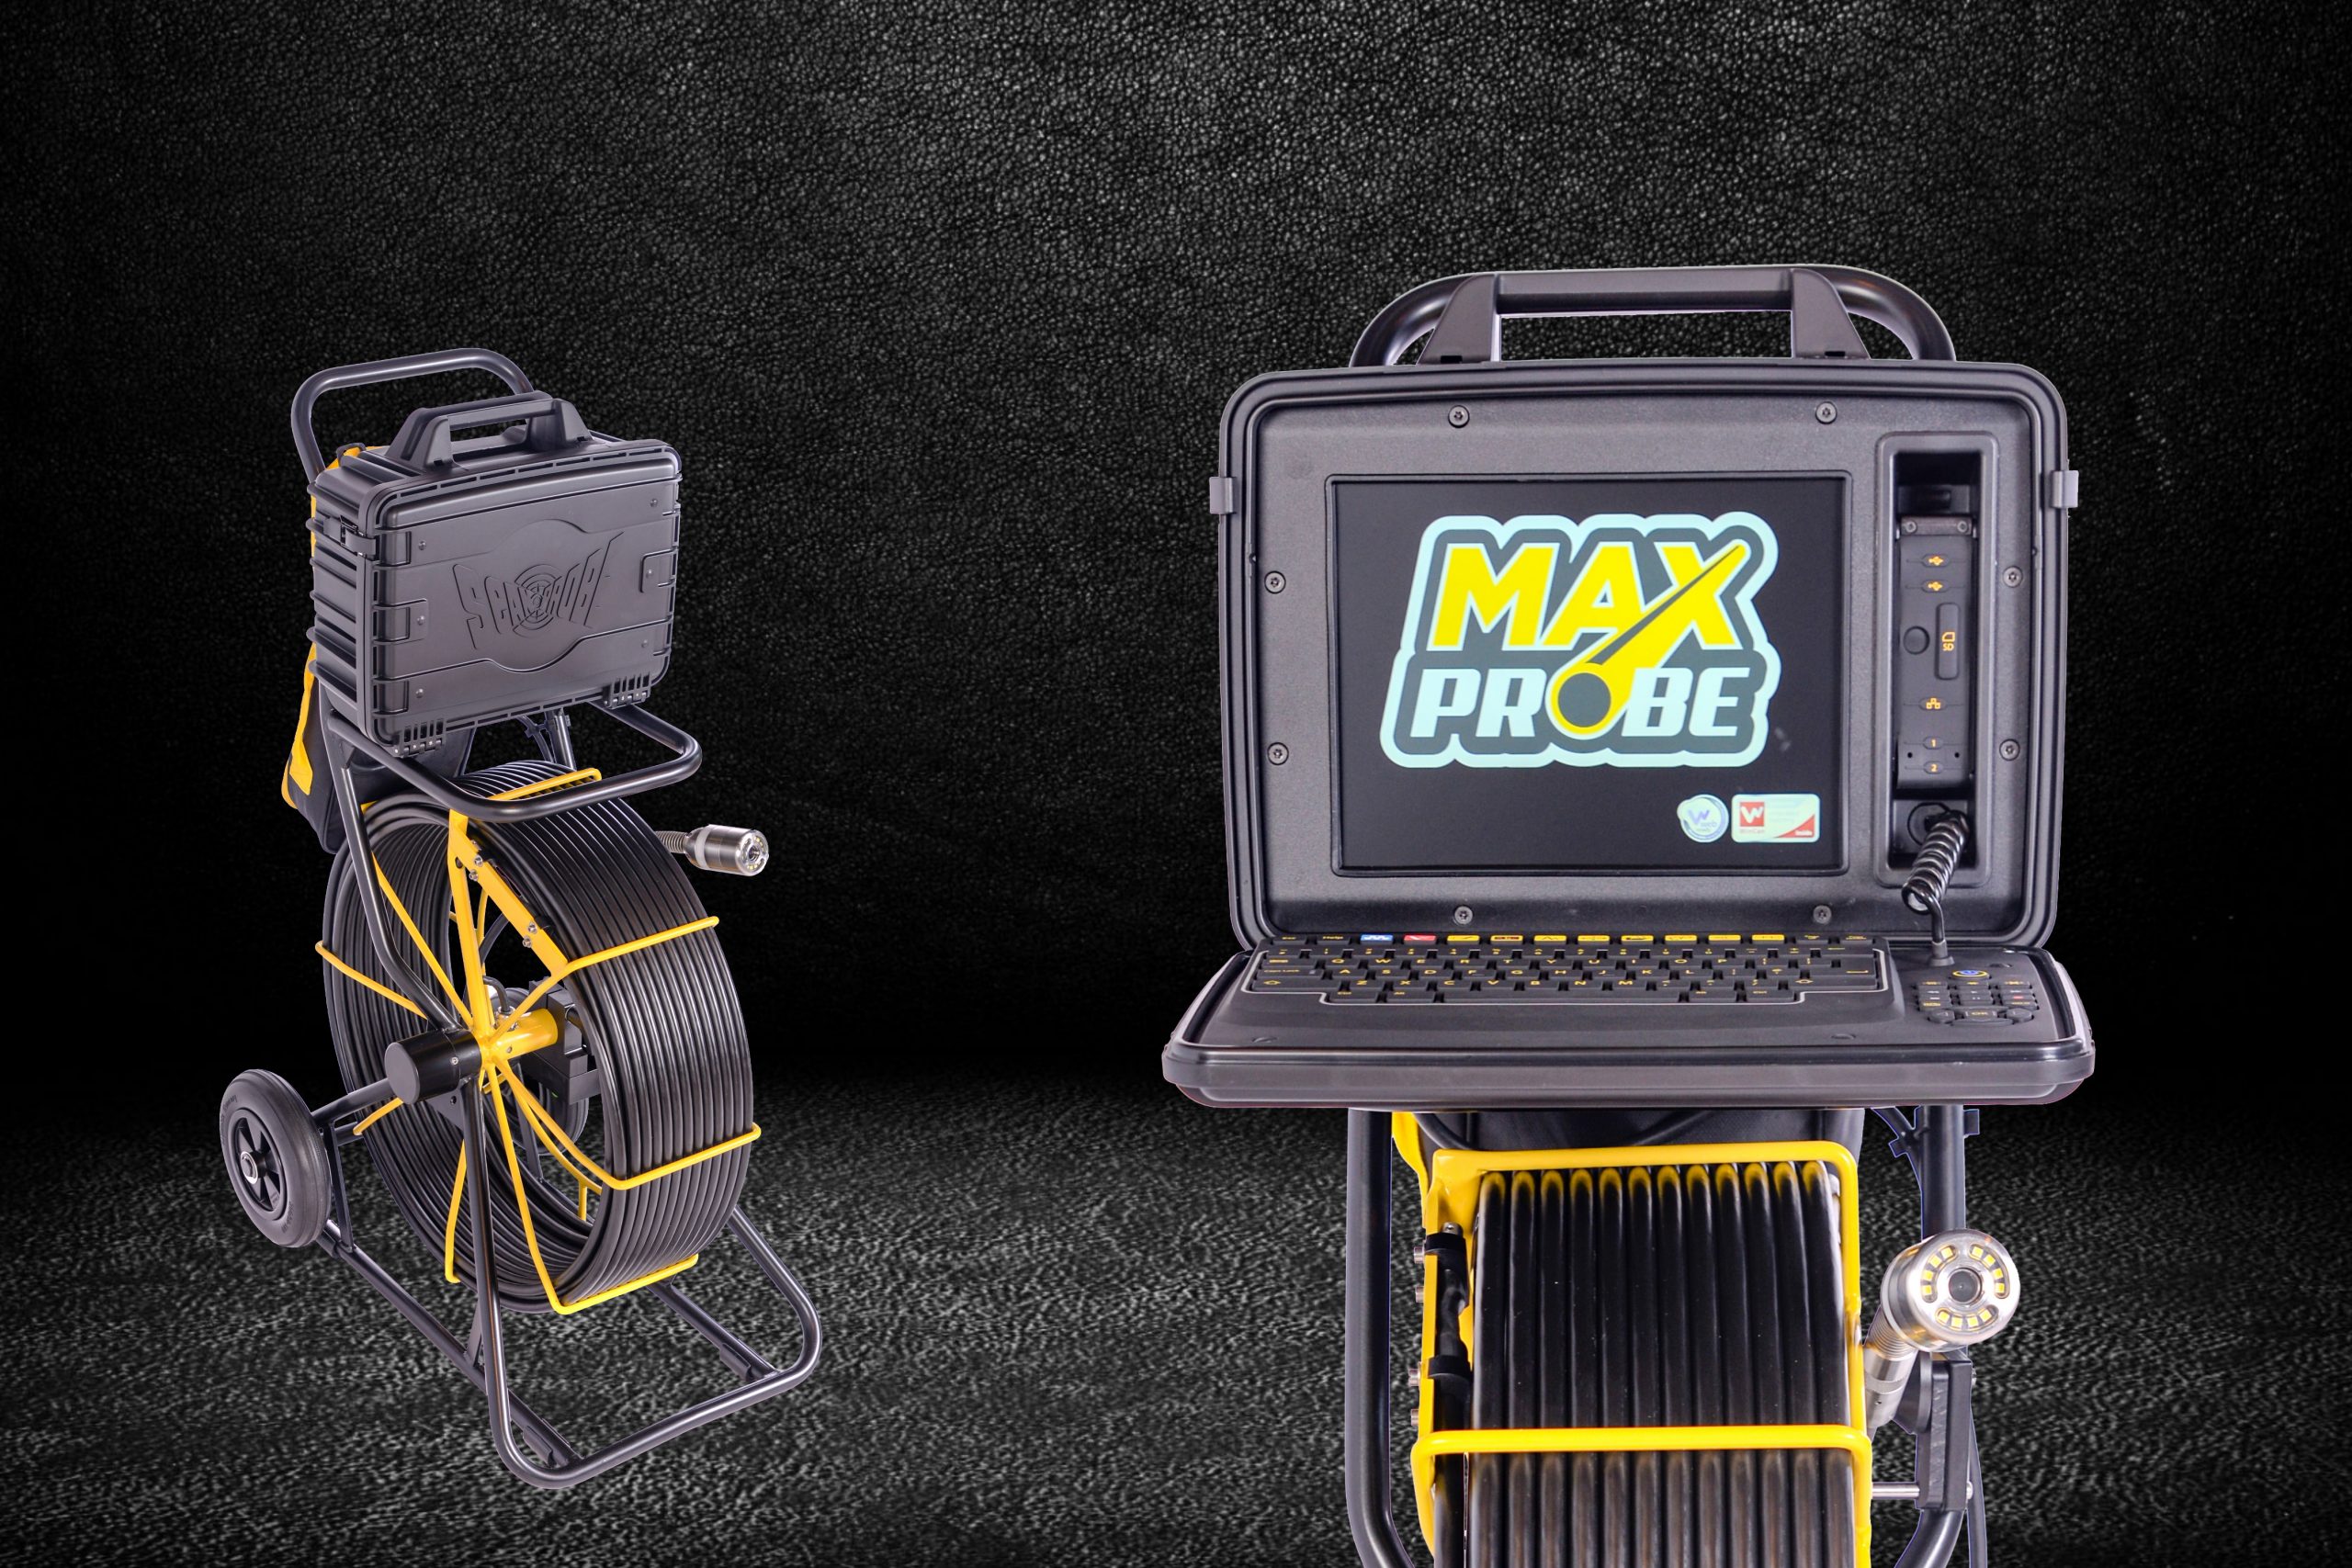 Maxprobe – Our Pipeline Inspection Camera System